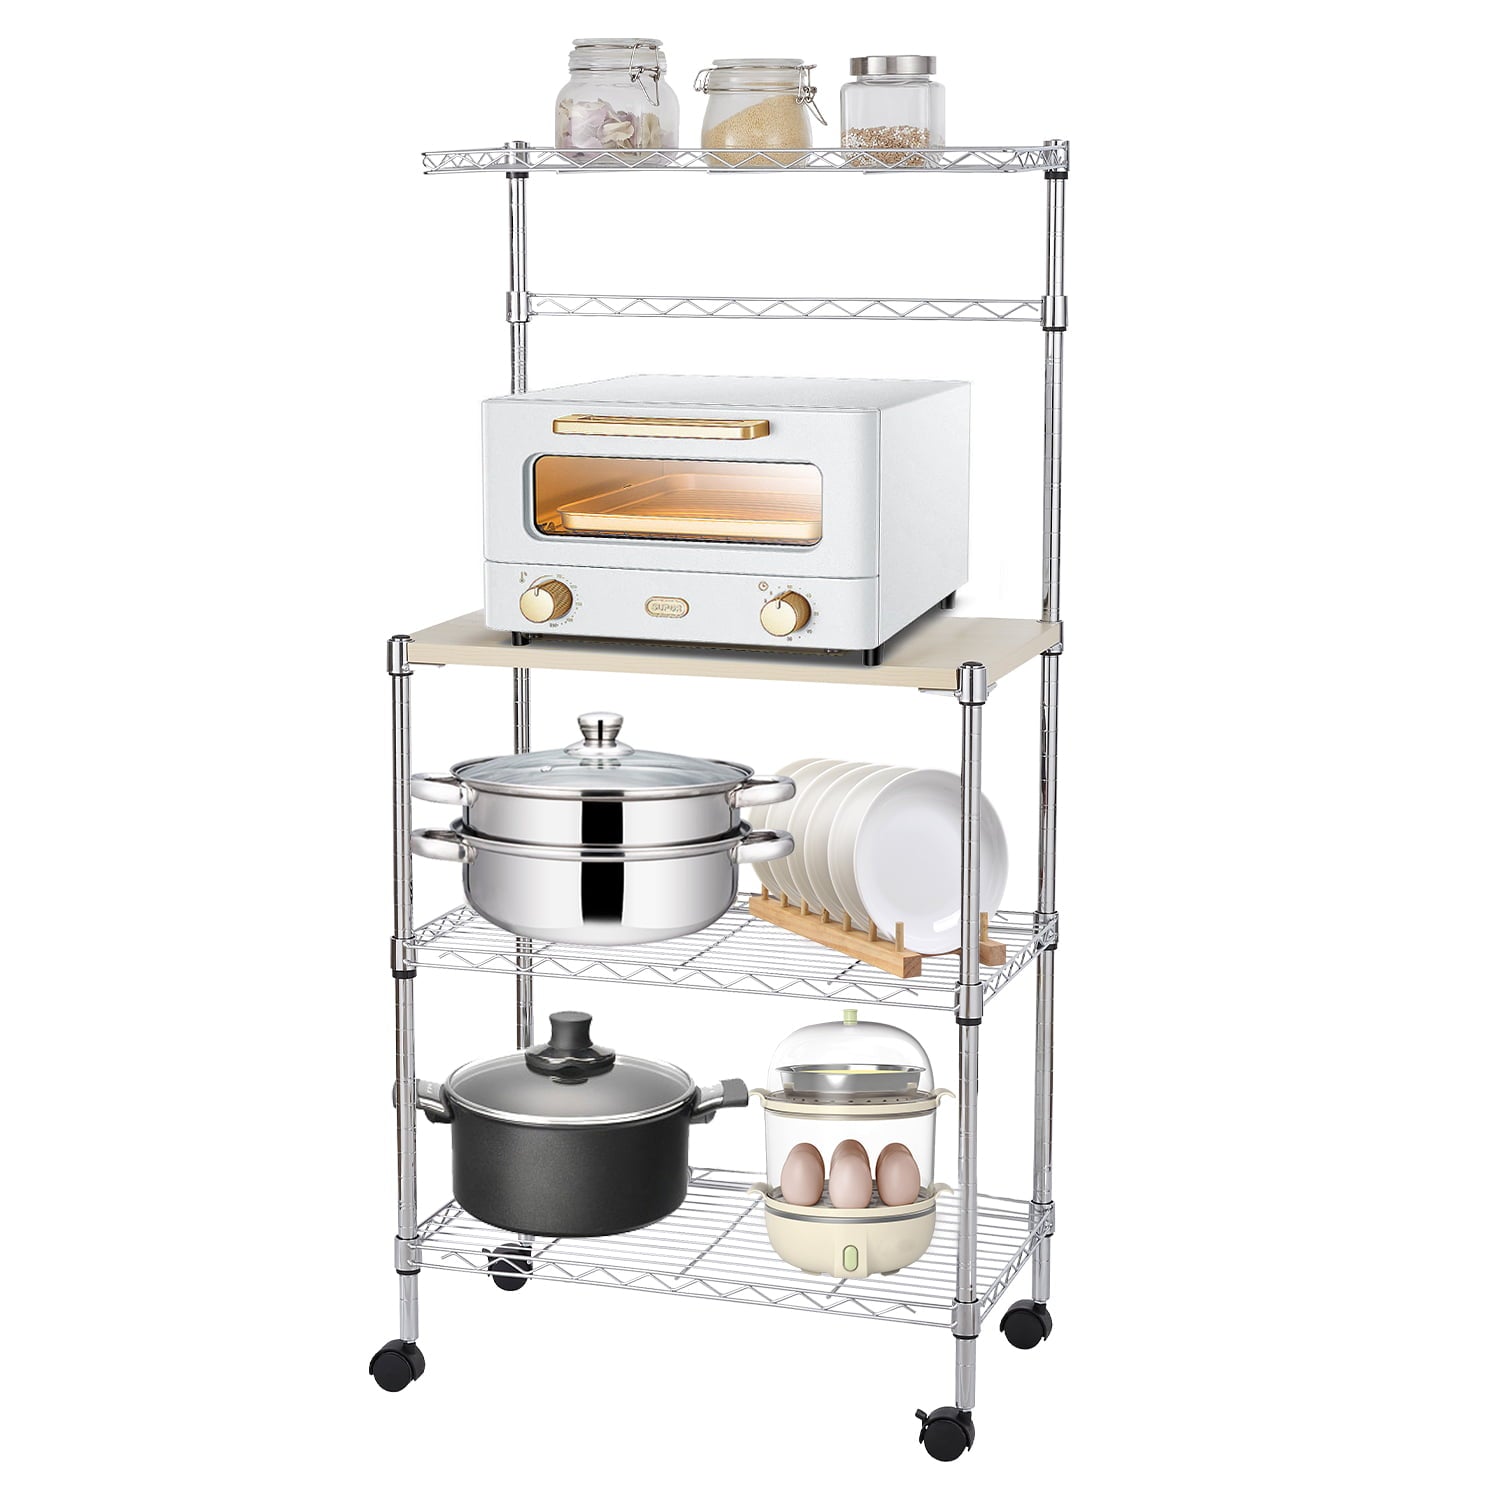 uhomepro Corner Bakers Rack， 4 Tier Kitchen Storage Microwave Rack， Microwave Cart with Cutting Board， Bakers Racks for Microwave， Silver Metal Storage Shelves